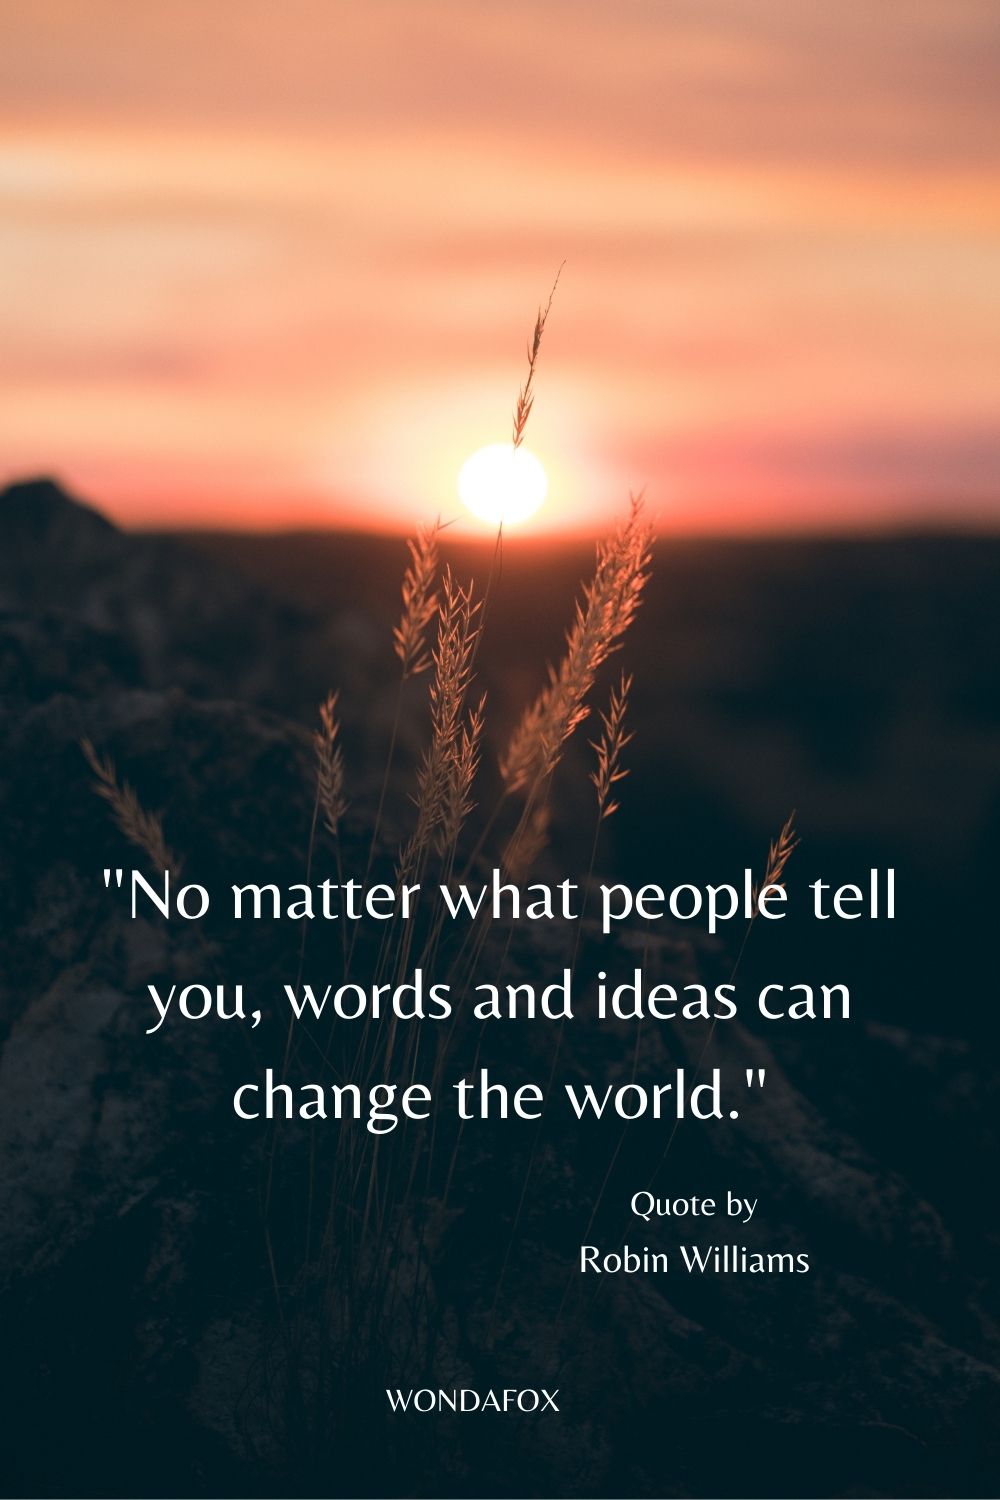 "No matter what people tell you, words and ideas can change the world."
Robin Williams